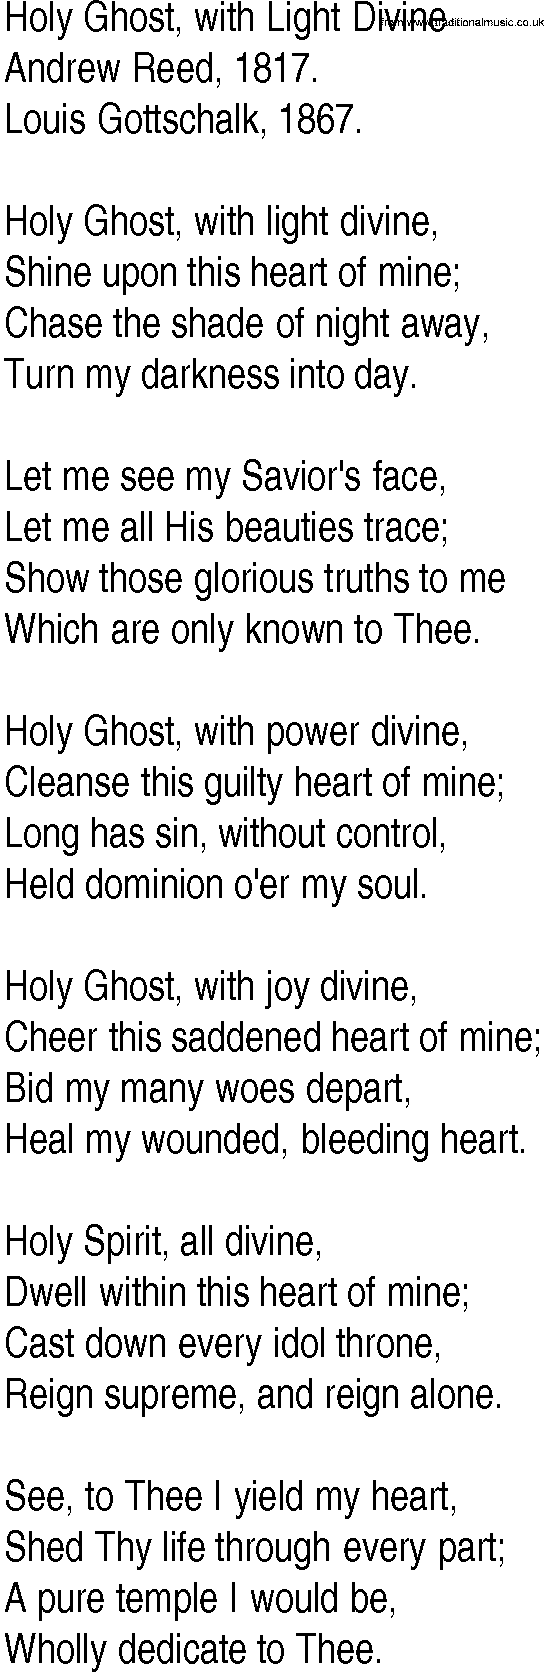 Hymn and Gospel Song: Holy Ghost, with Light Divine by Andrew Reed lyrics